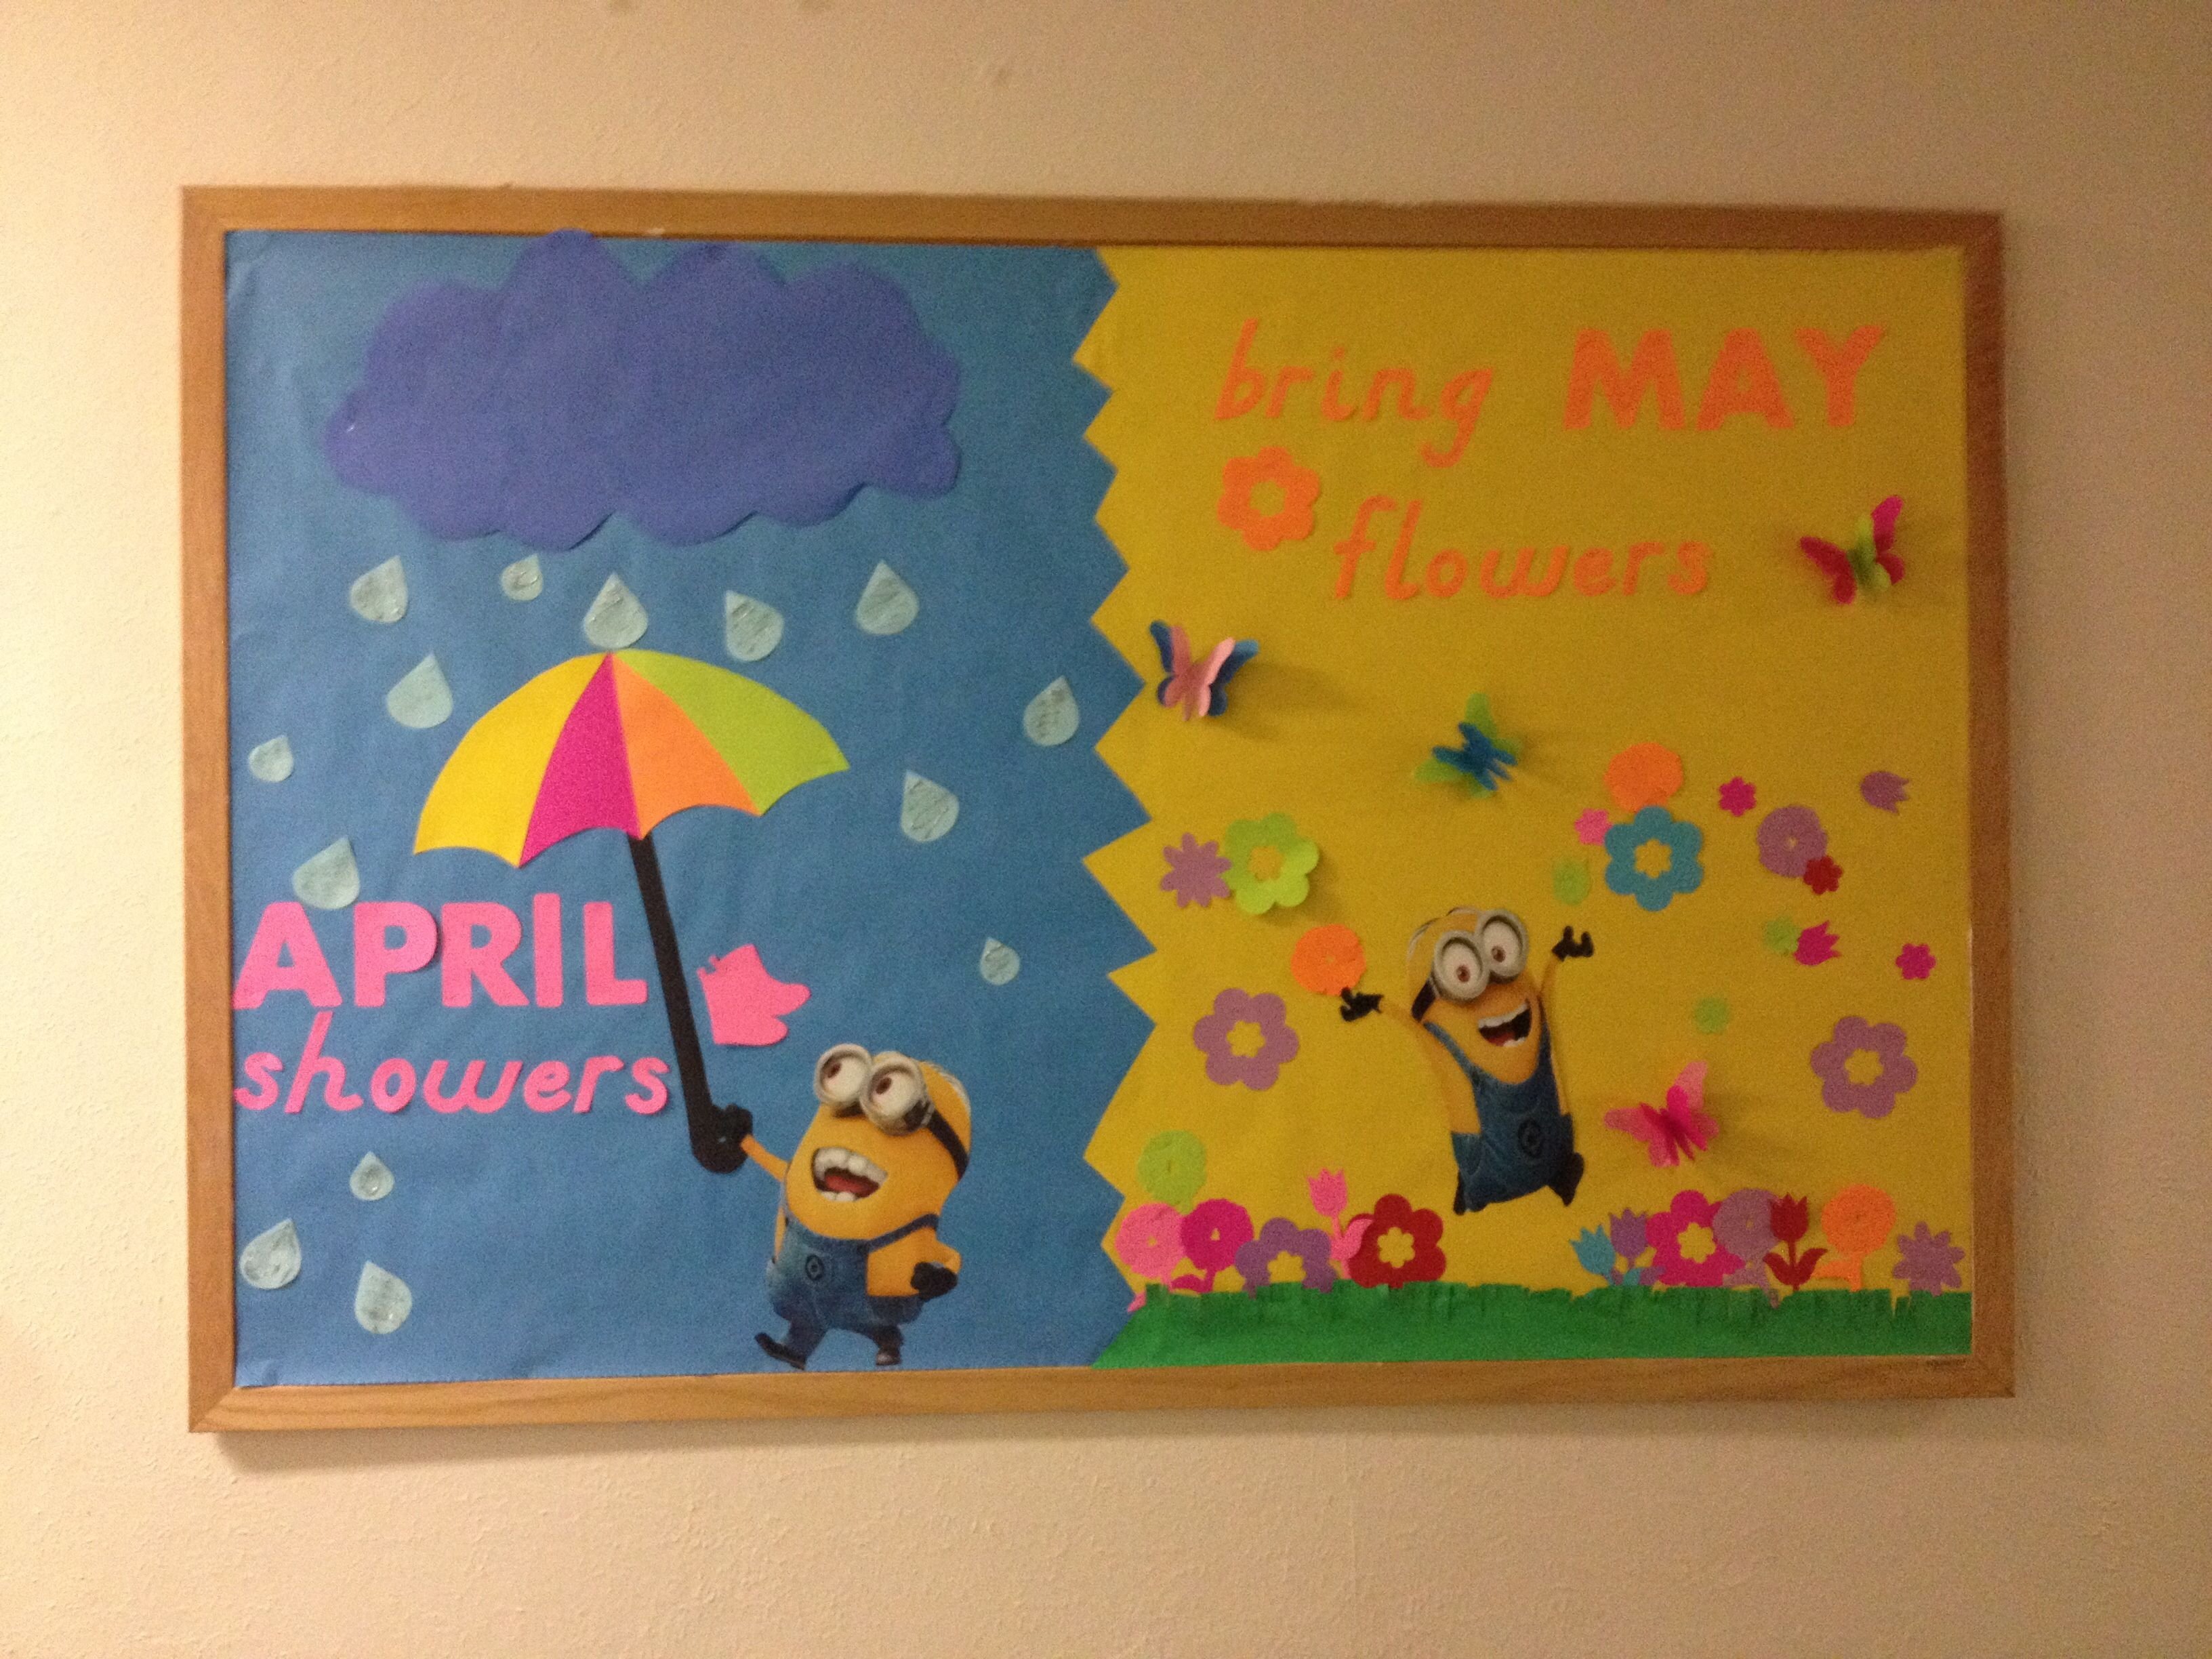 10 Attractive April Showers Bulletin Board Ideas ra ideas april minion bulletin board april showers bring may 2022